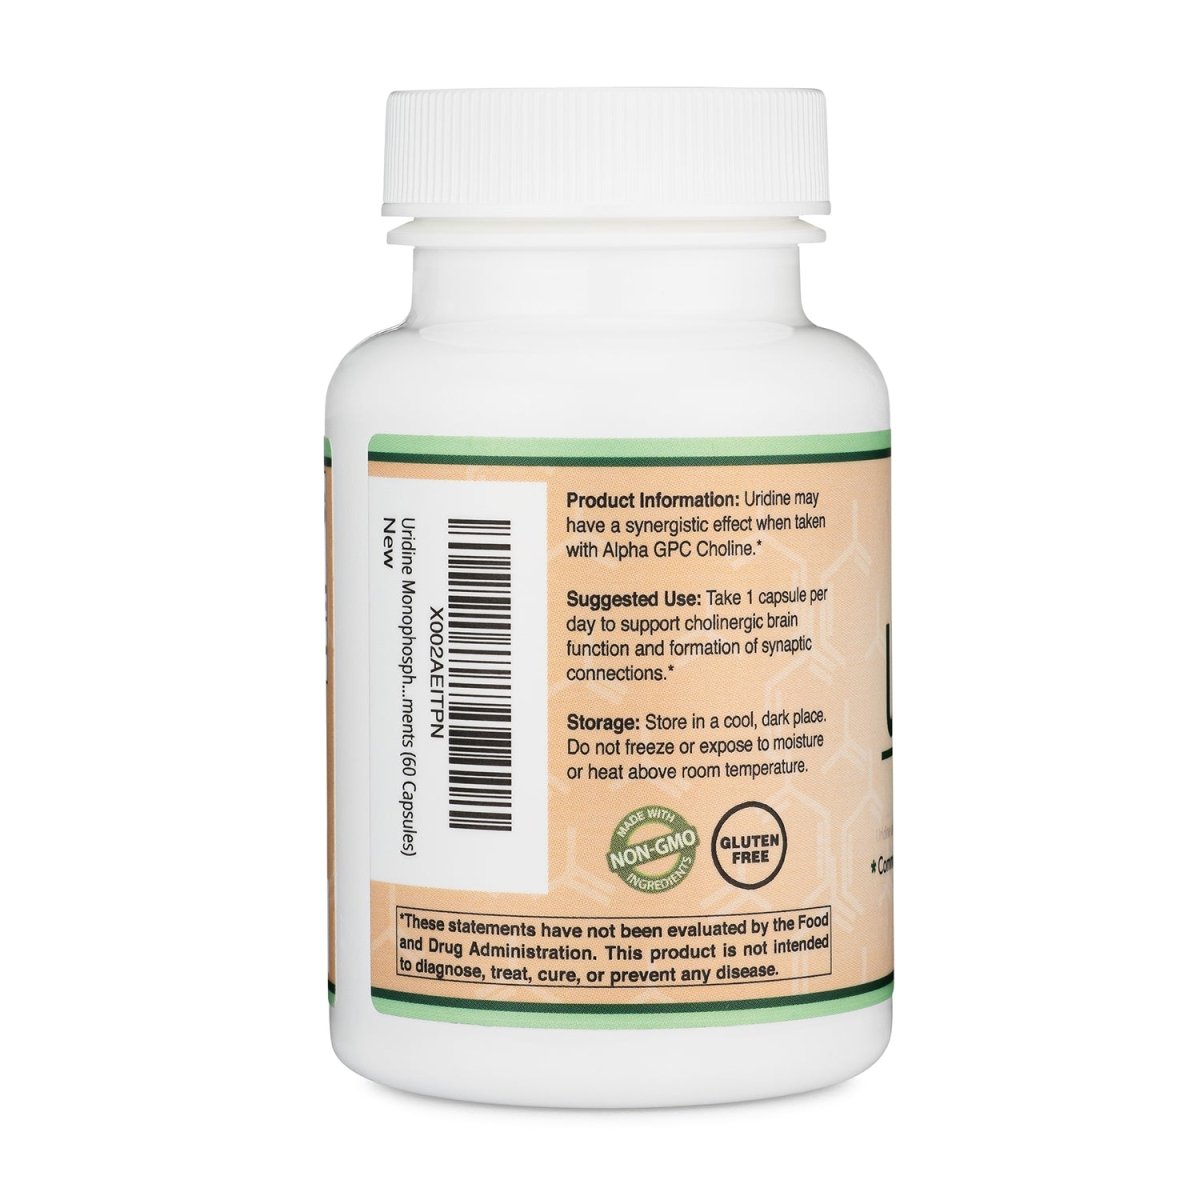 Uridine Double Pack - Double Wood Supplements